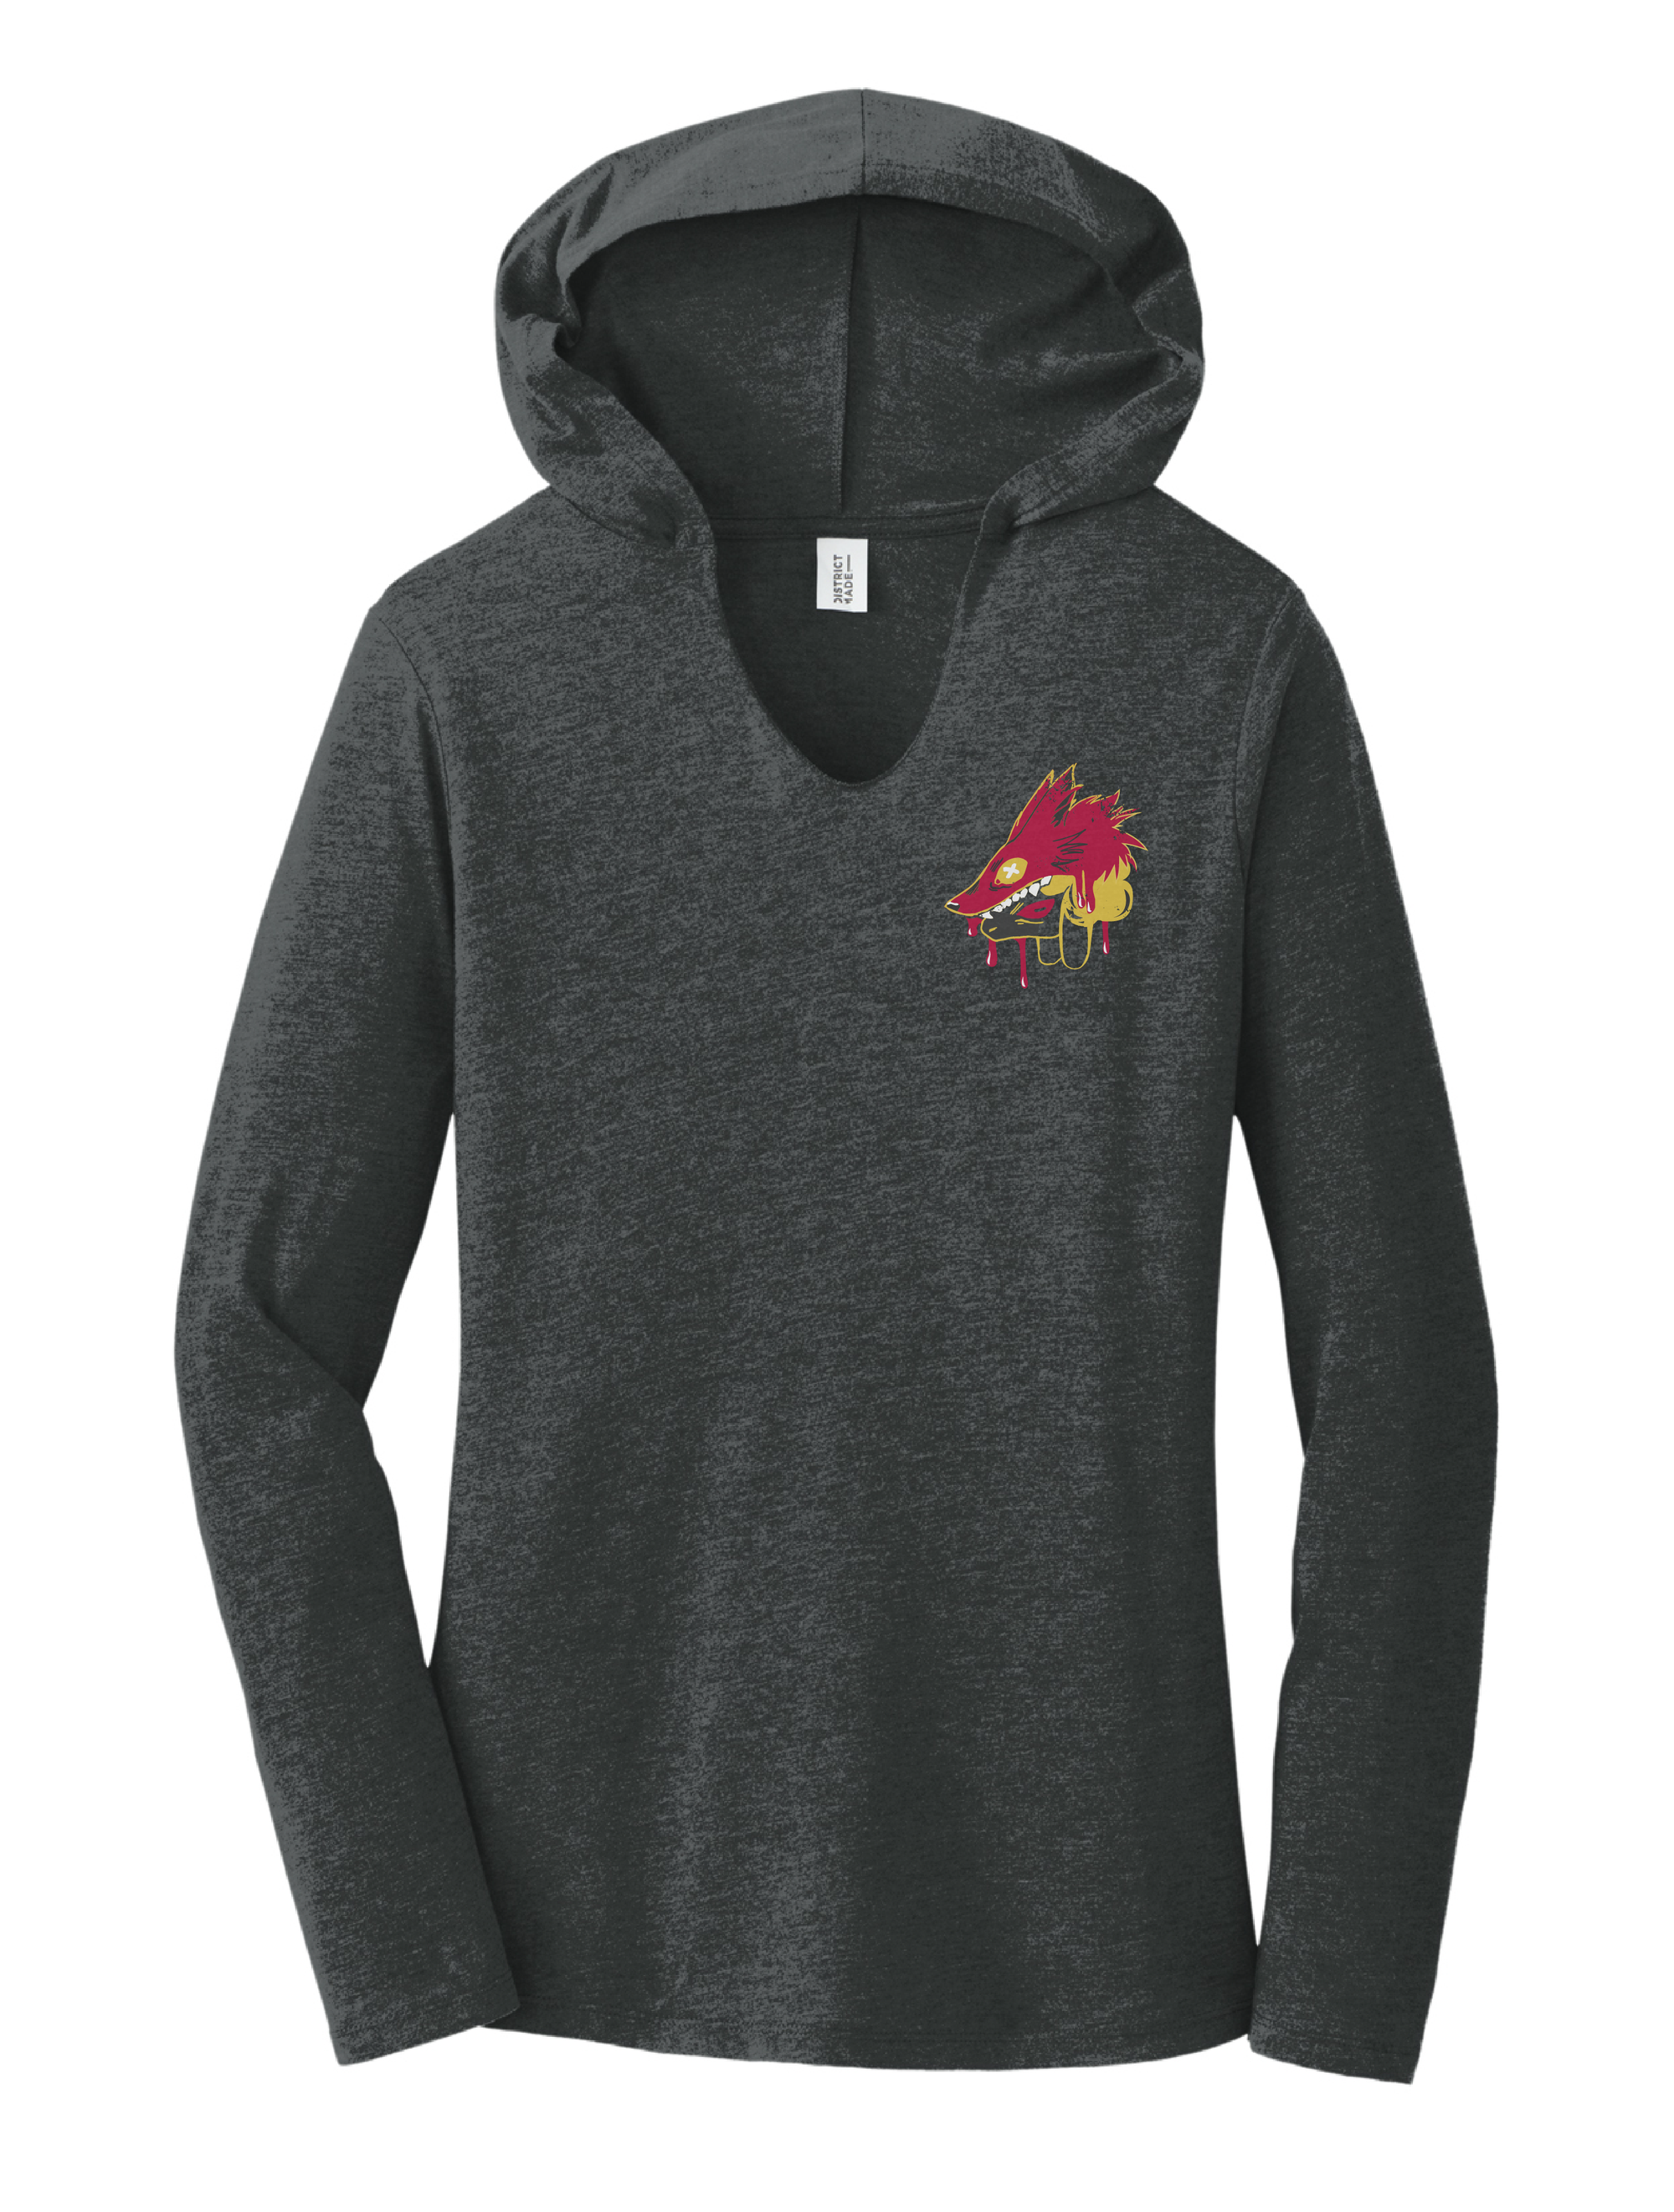 Heather black hoodie with red wolf and yellow sheep